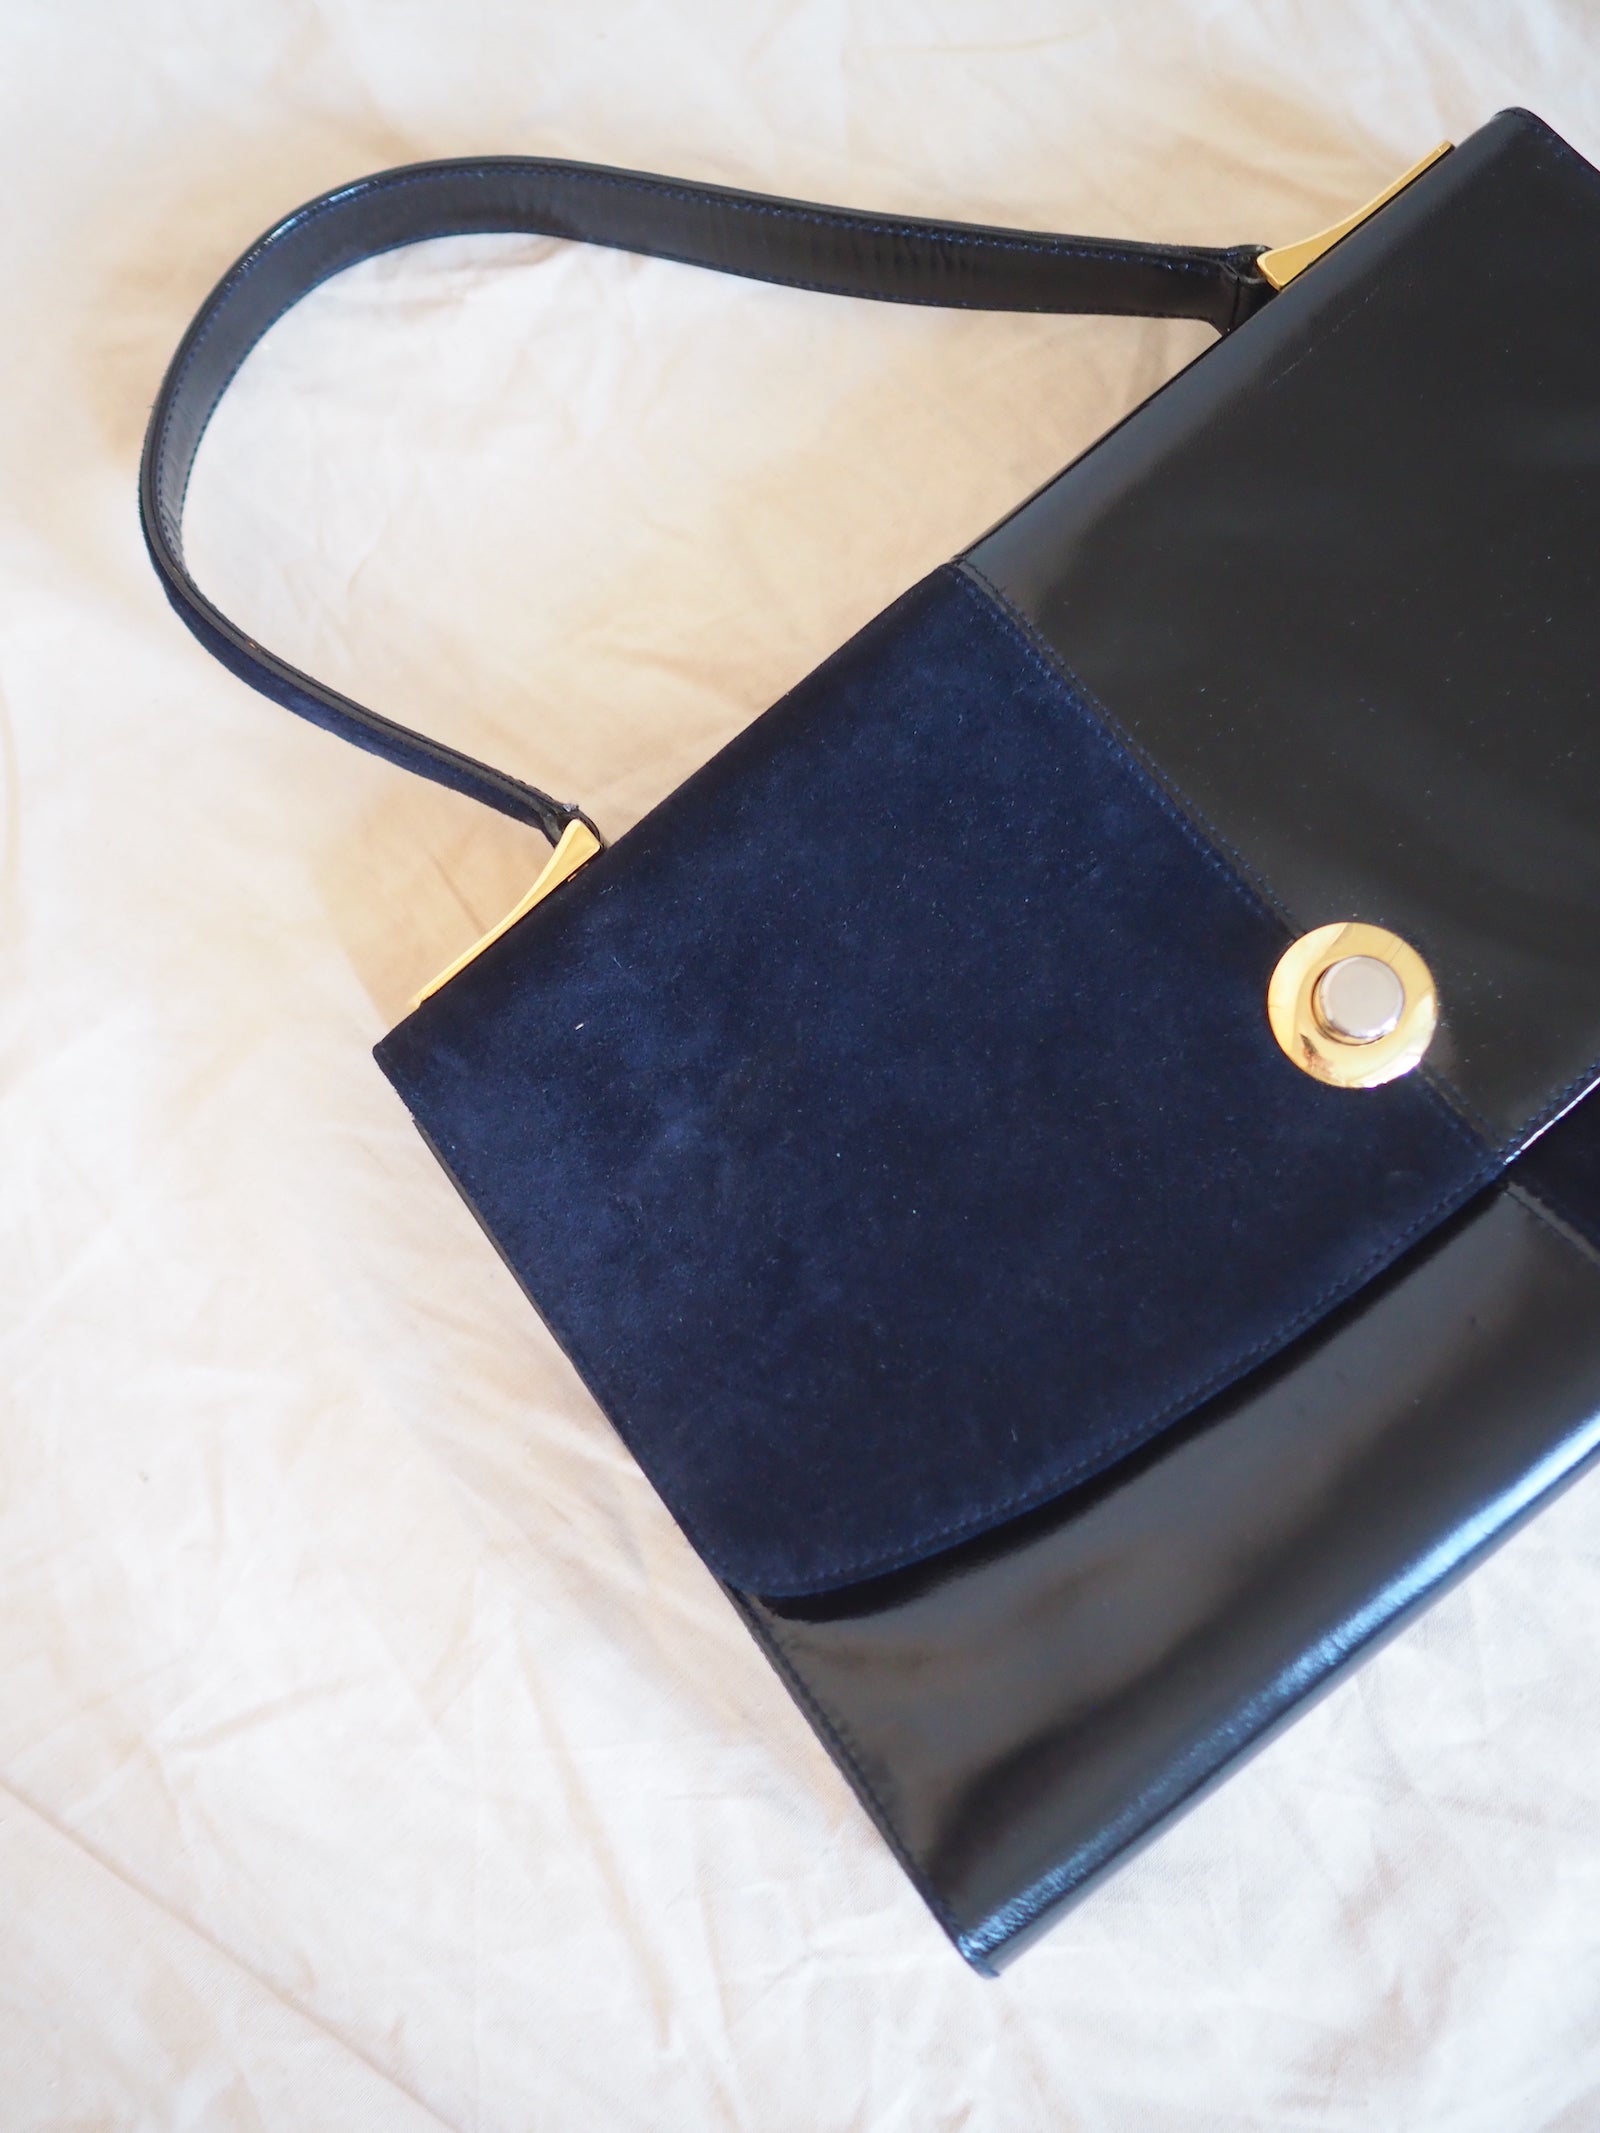 Patent & Suede Leather Bag